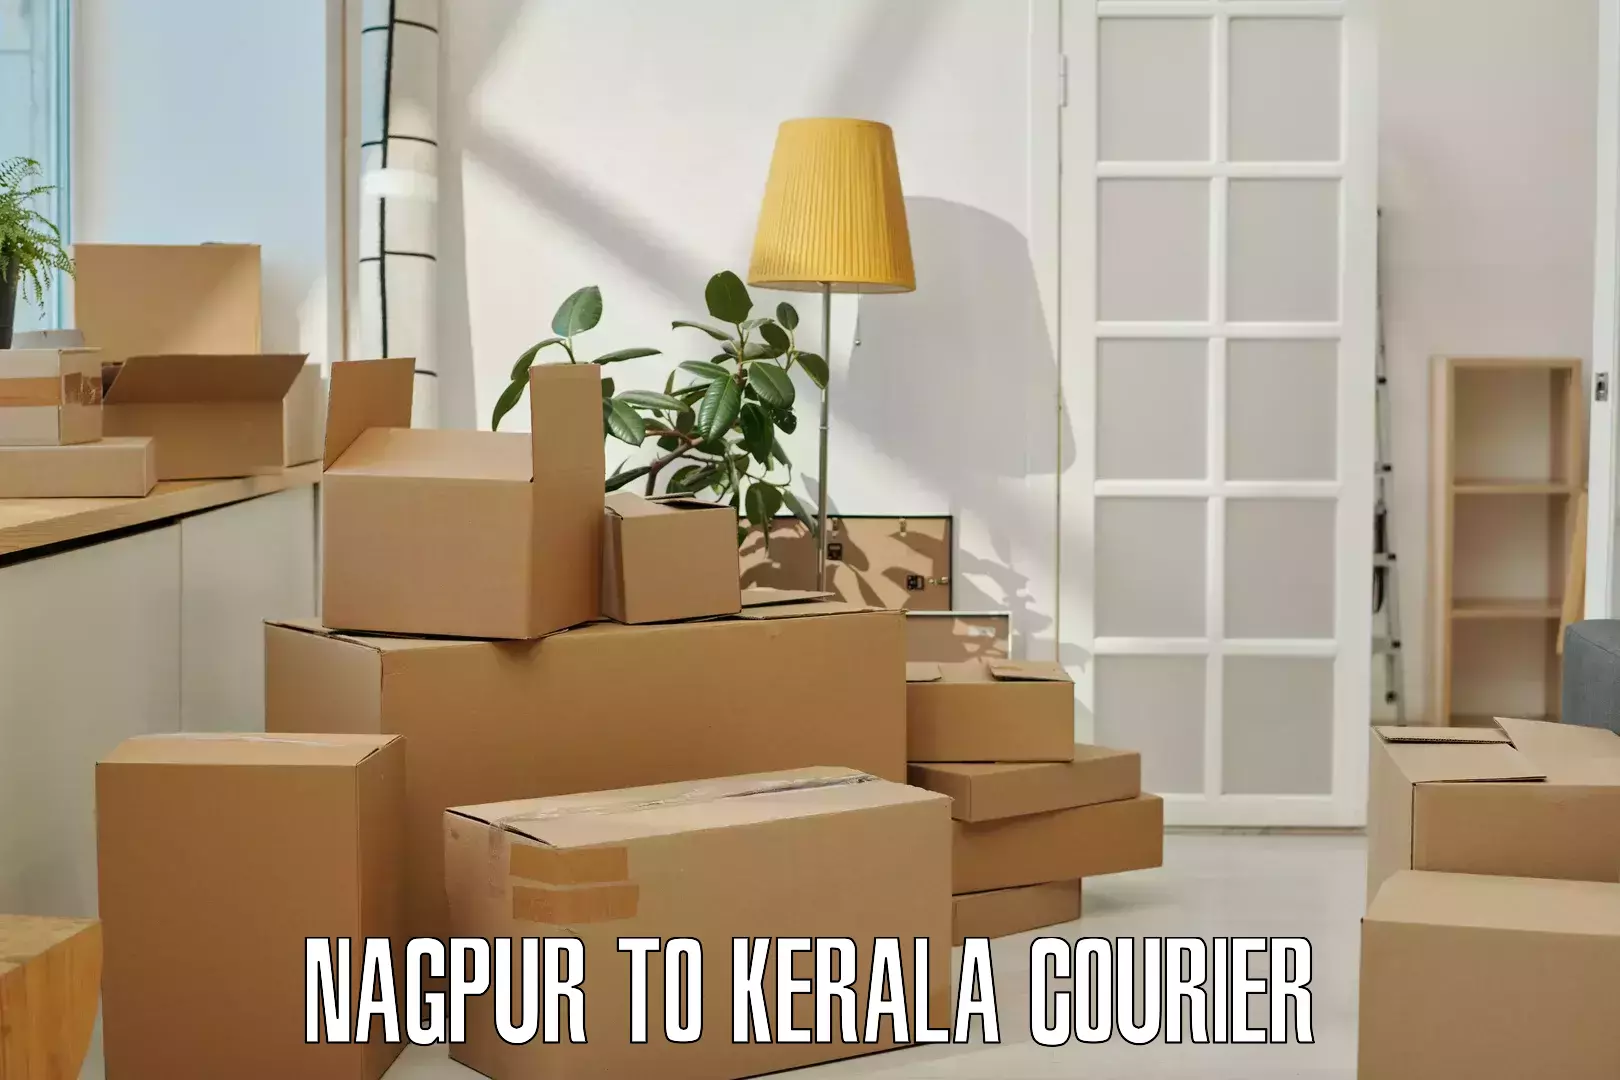 End-to-end delivery Nagpur to Kerala